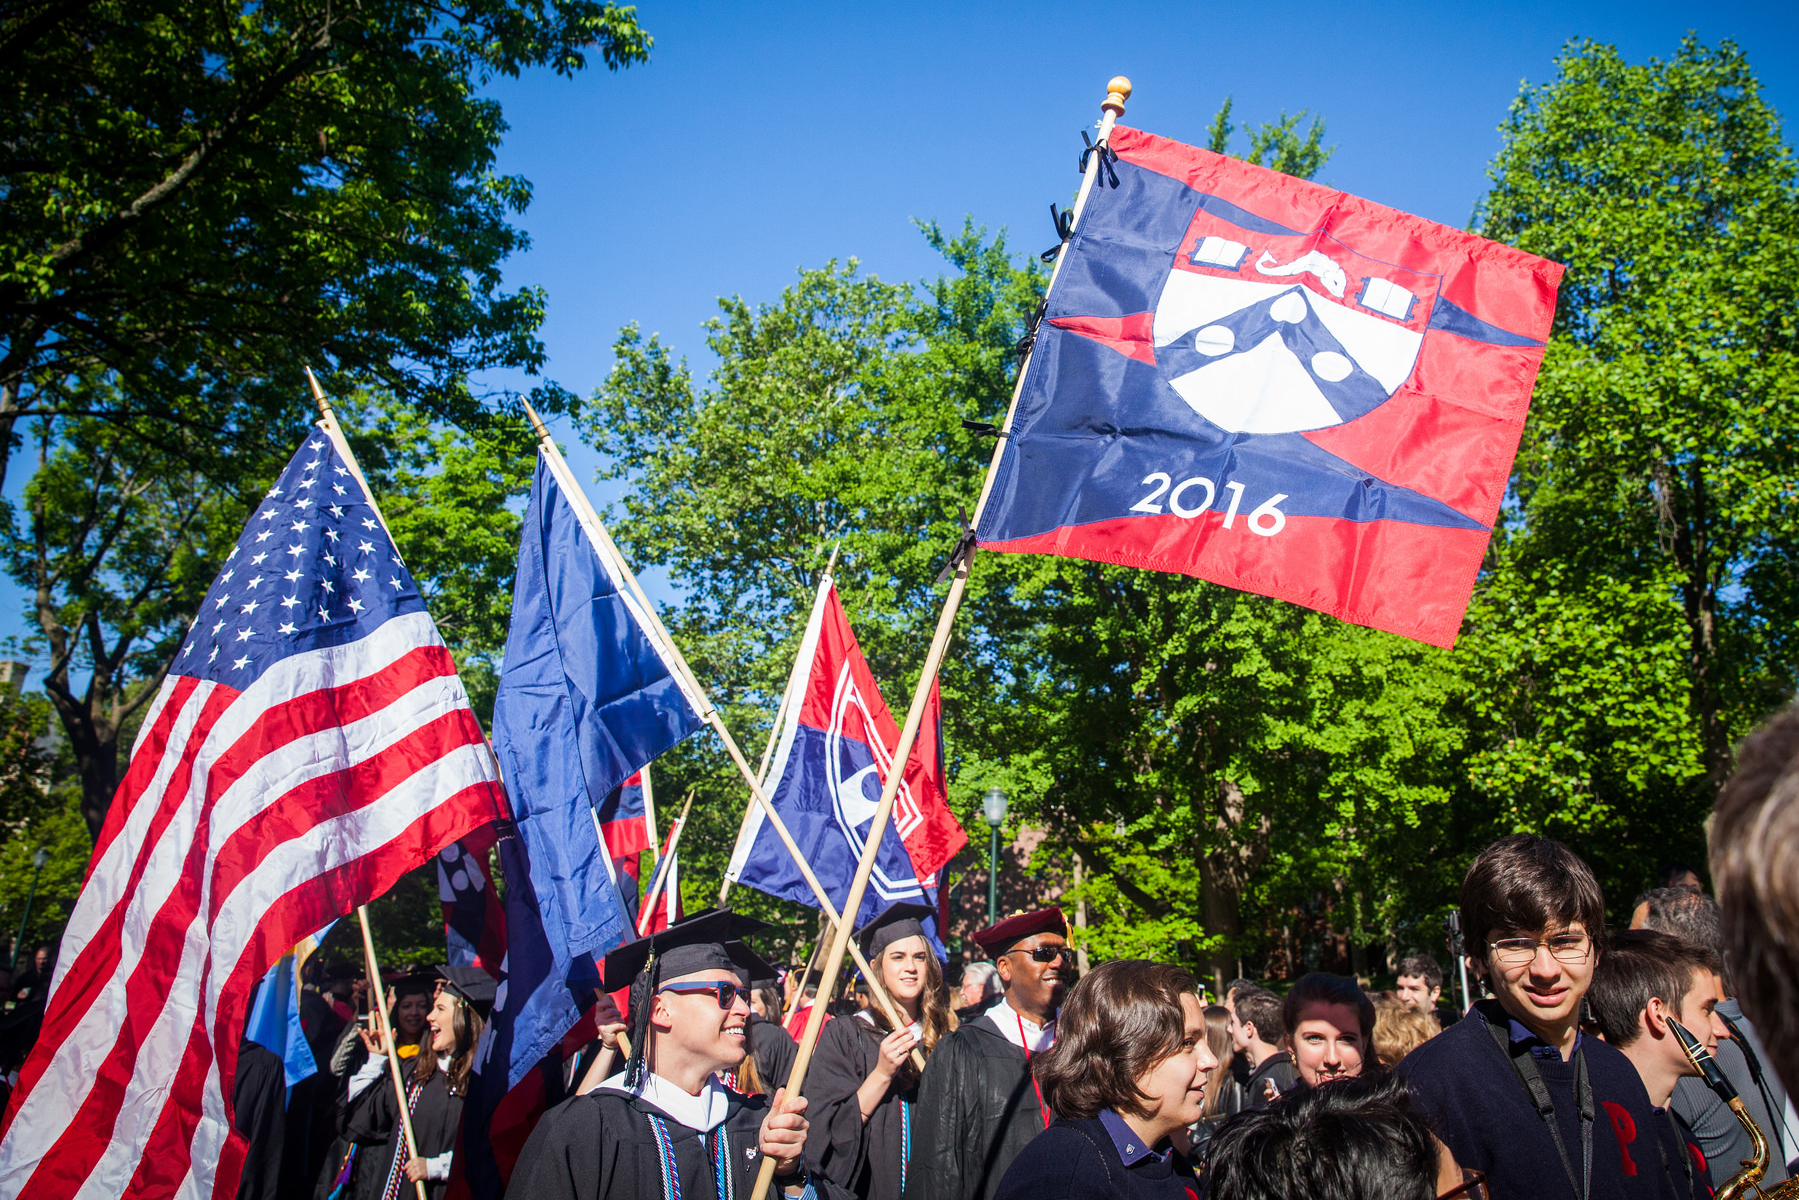 graduates carrying flags labeled with 2016 and the penn shield